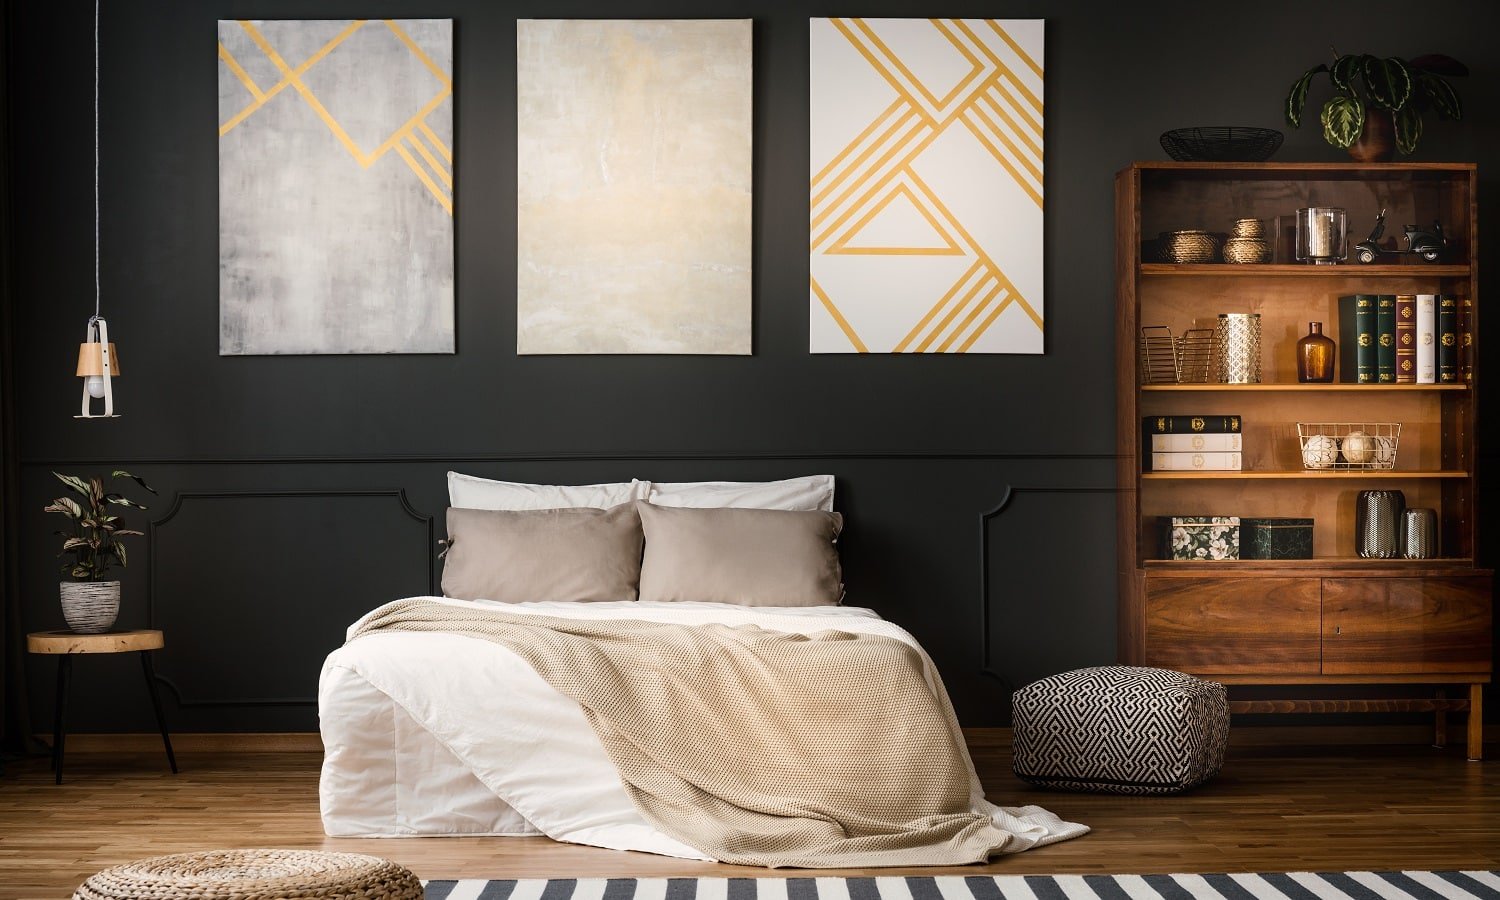 Elegant, wooden, antique bookcase in a dark, modern bedroom interior with a black wall and beige paintings with golden elements